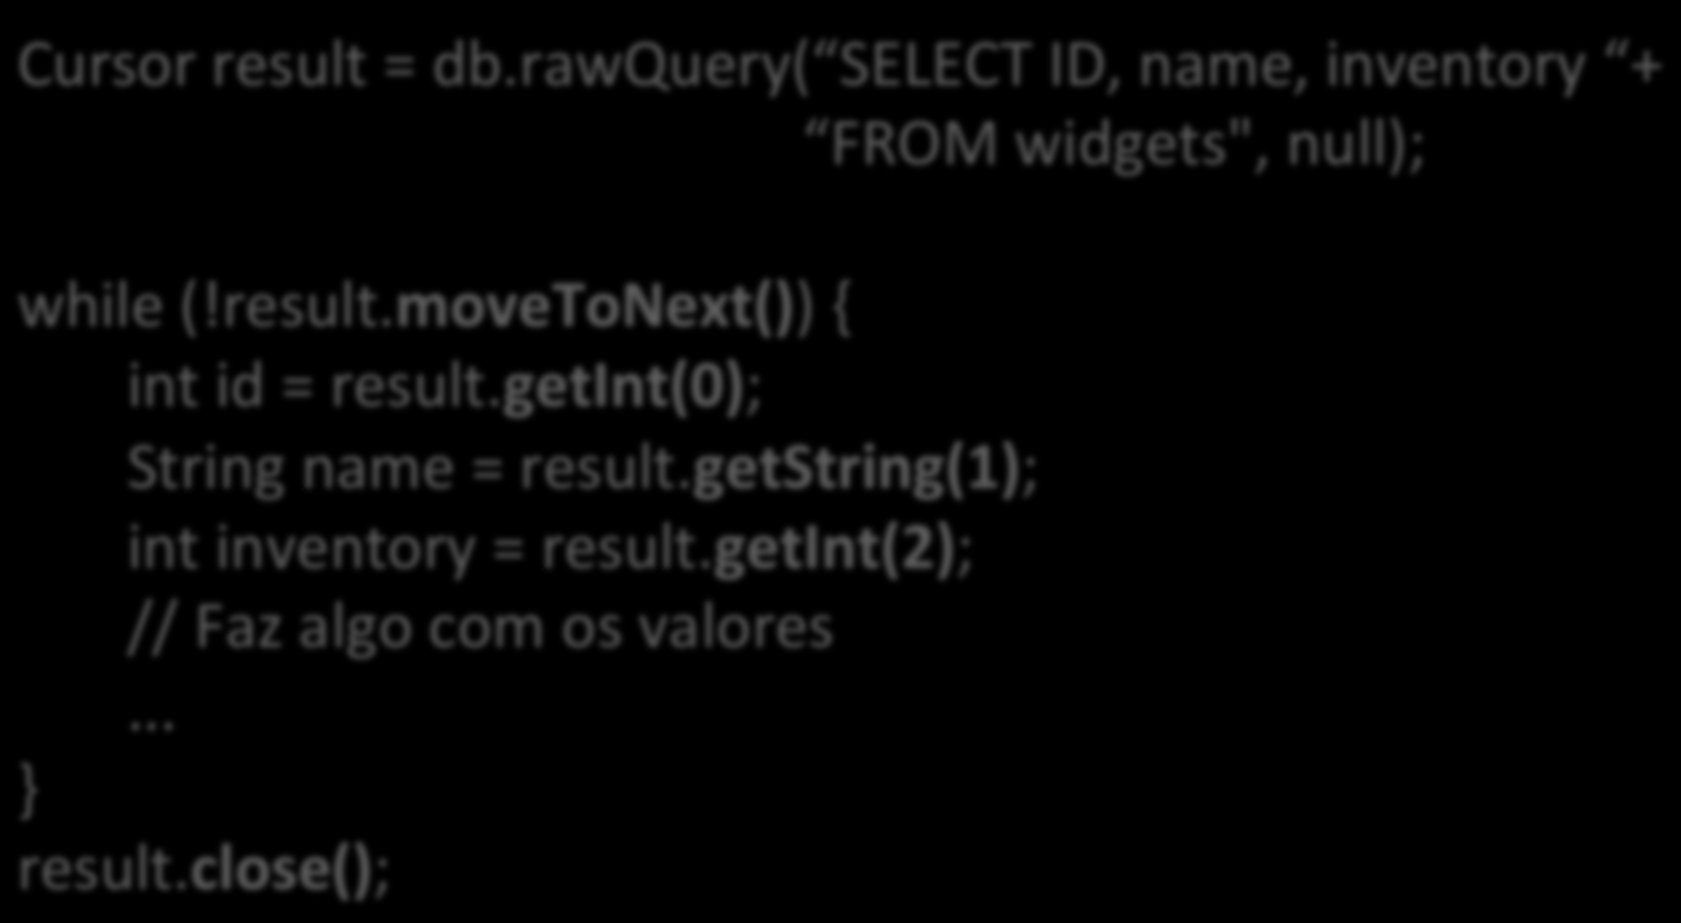 Manipulando Cursores Cursor result = db.rawquery( SELECT ID, name, inventory + FROM widgets", null); while (!result.movetonext()) { int id = result.